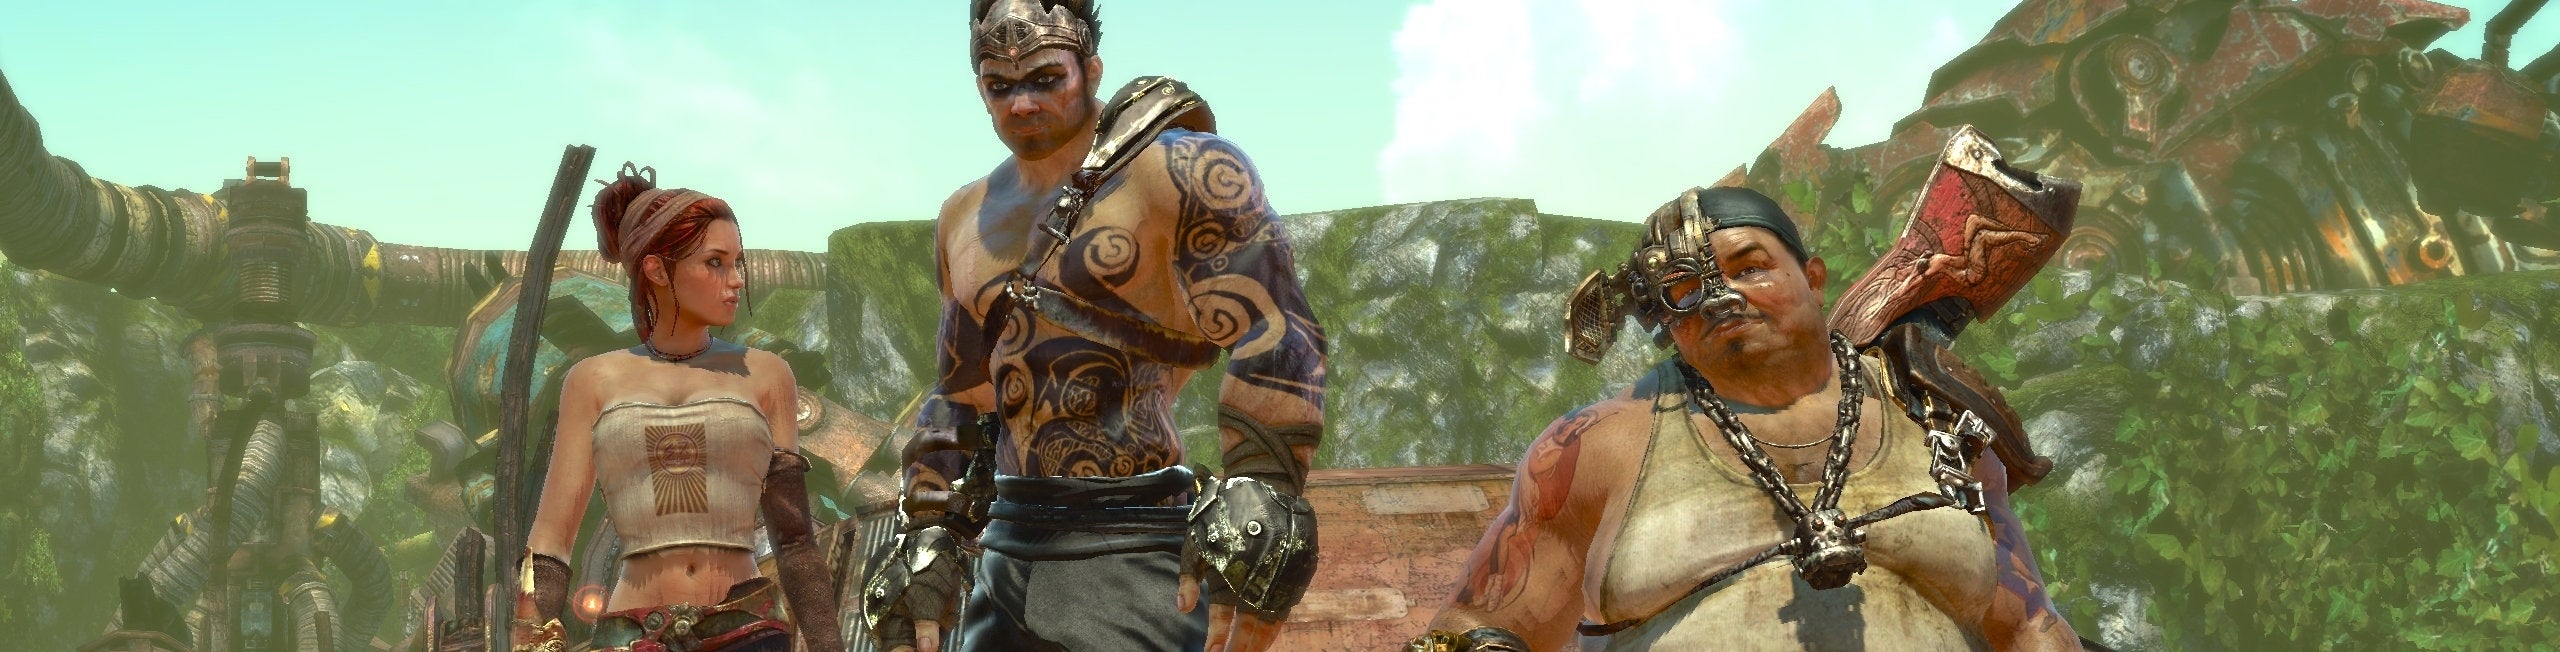 Image for Enslaved: Odyssey to the West review